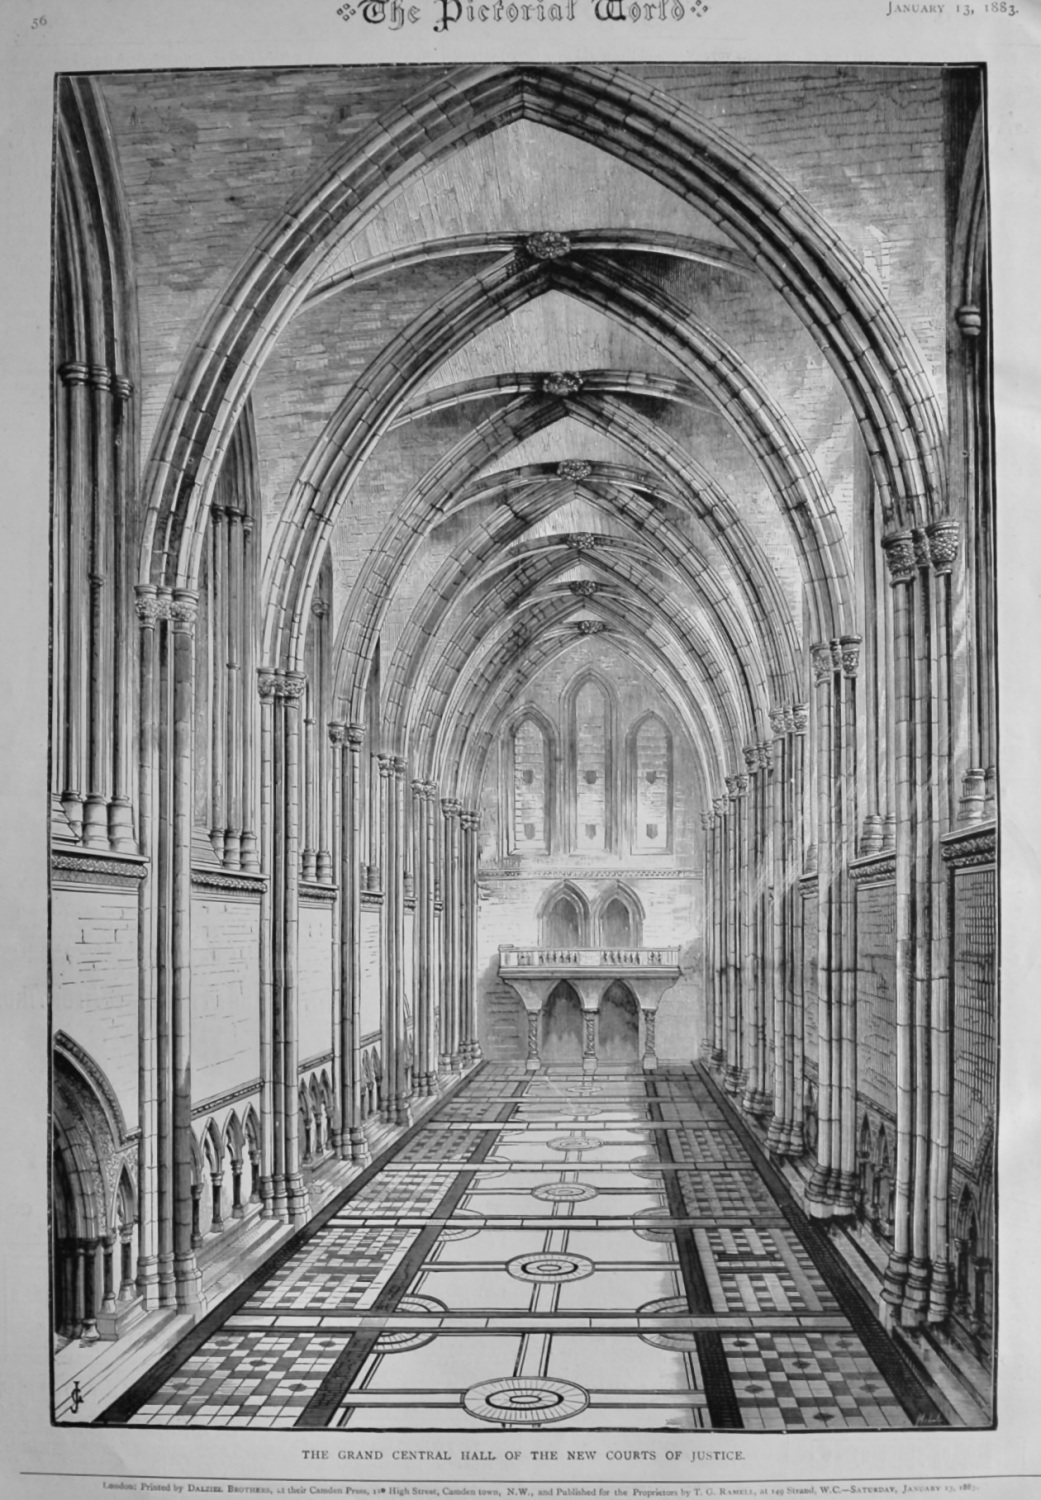 The Grand Central Hall of the New Courts of Justice.  1883.